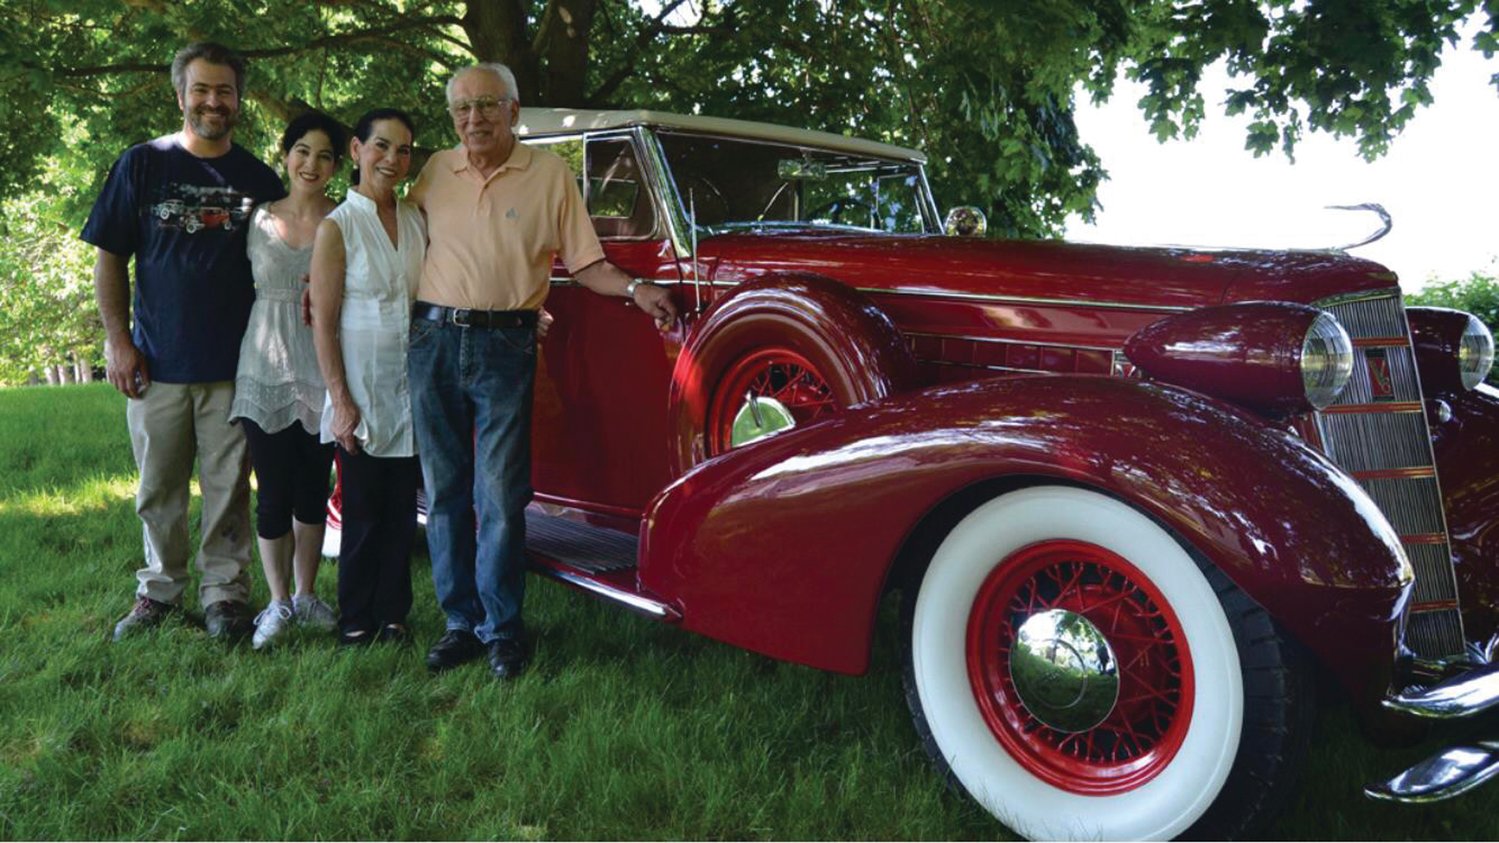 FAMILY AFFAIR: John Ricci poses for a photo with his fully restored 1934 Cadillac and his wife, Donna, and children, Jennifer and John Michael.